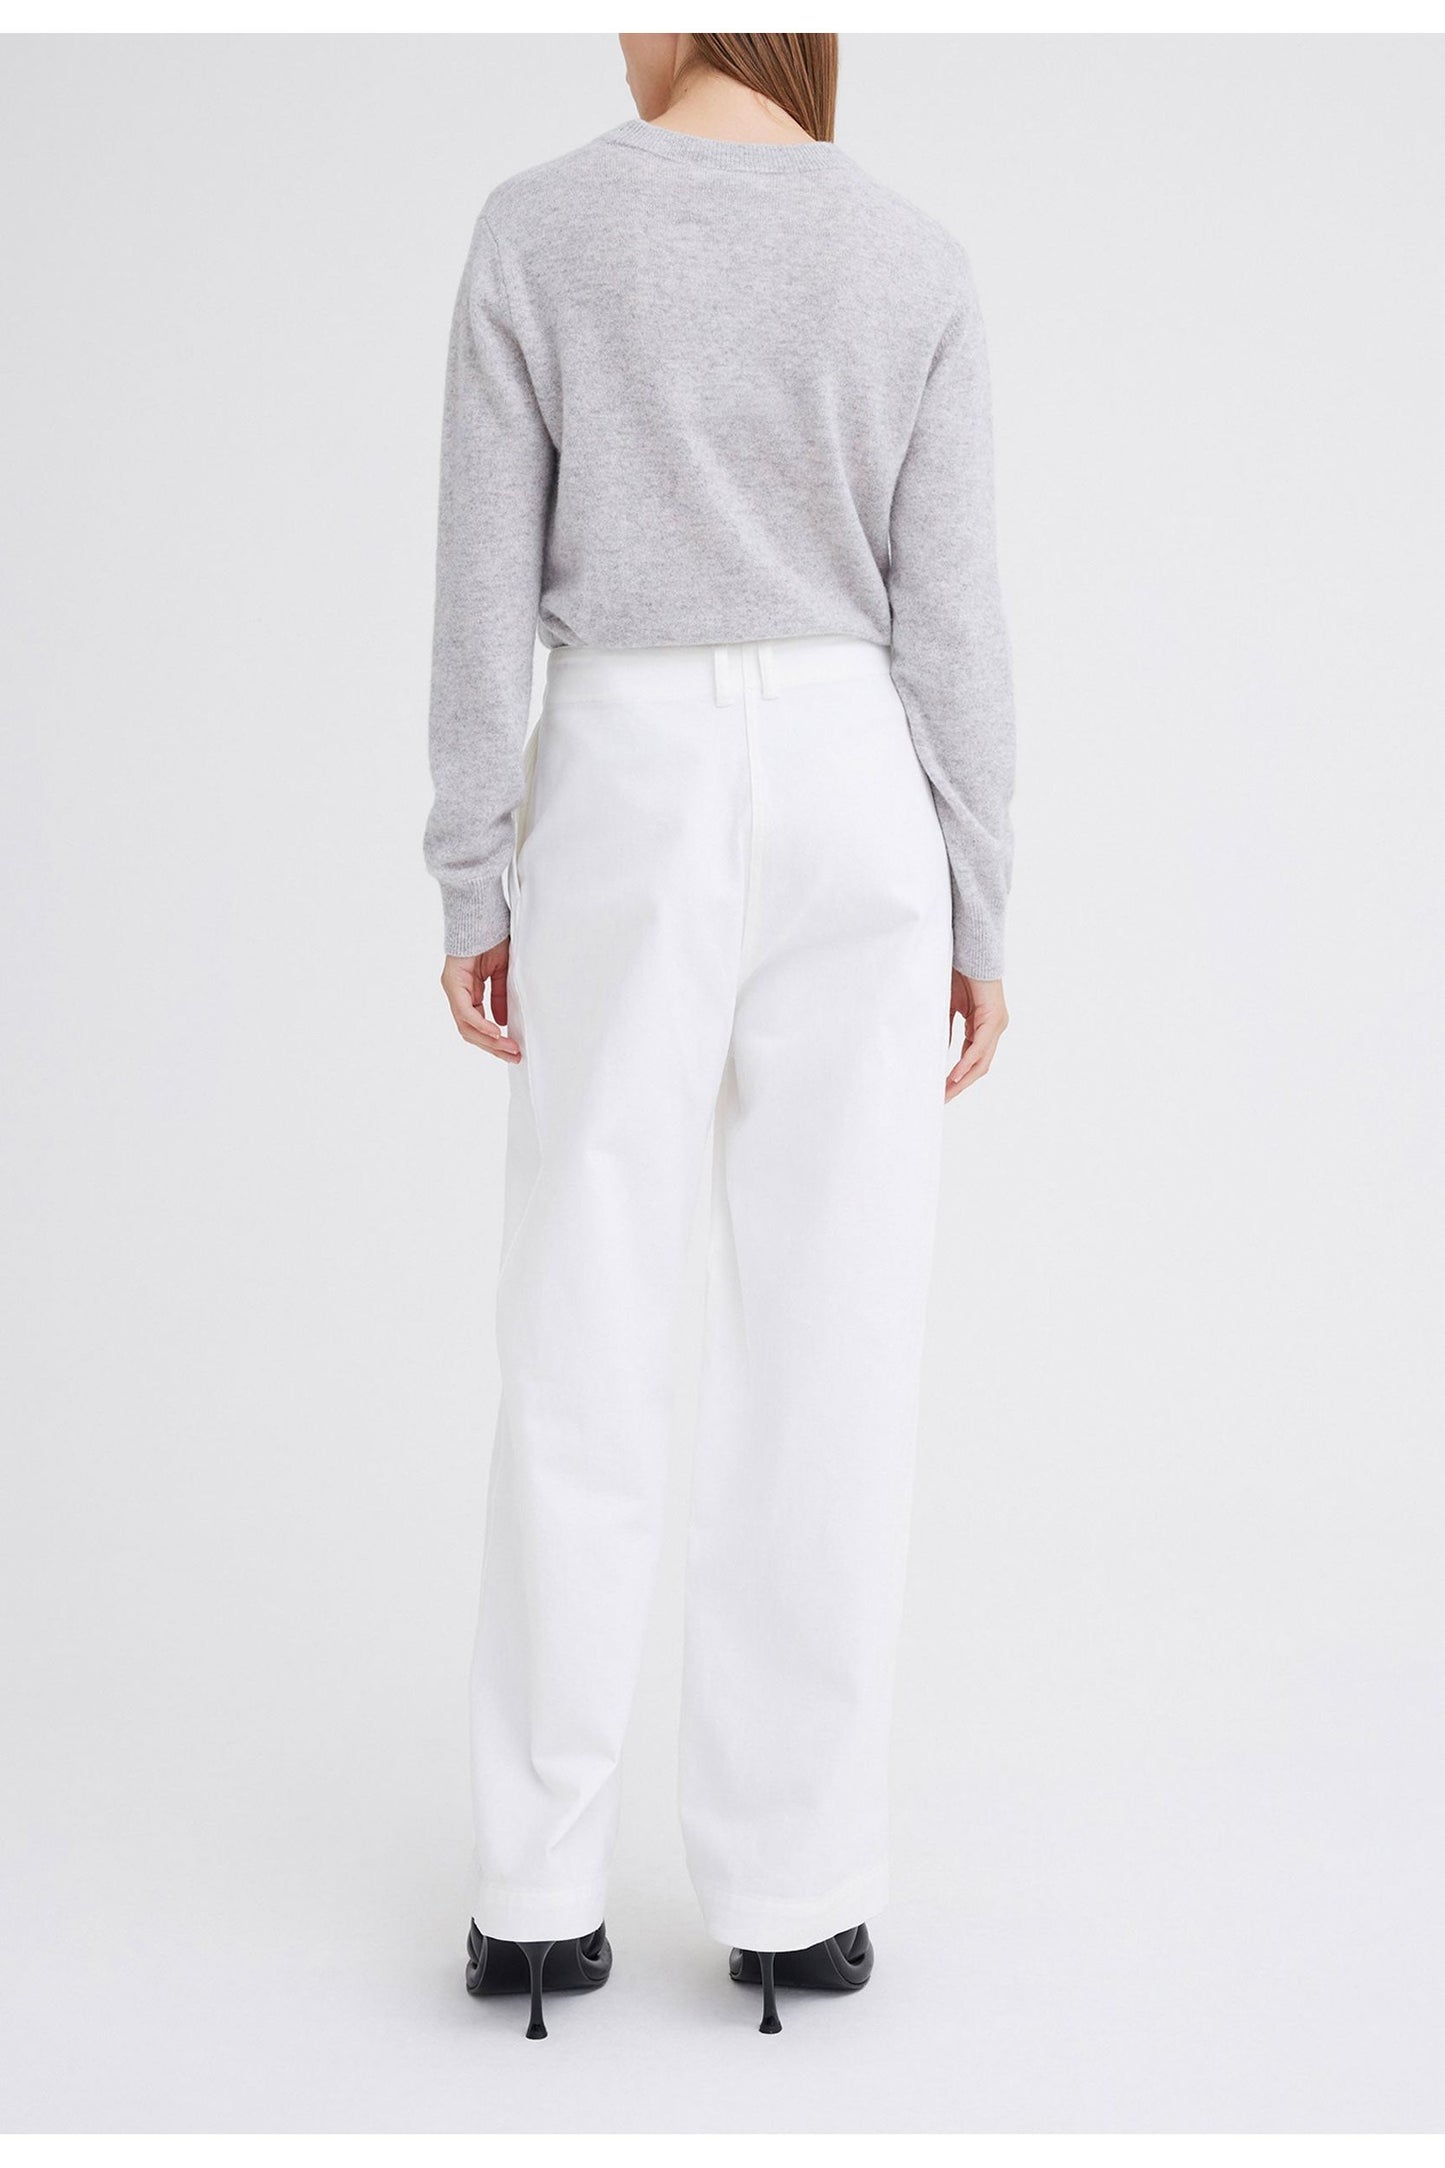 Trades Pant in White by Jac + Jack